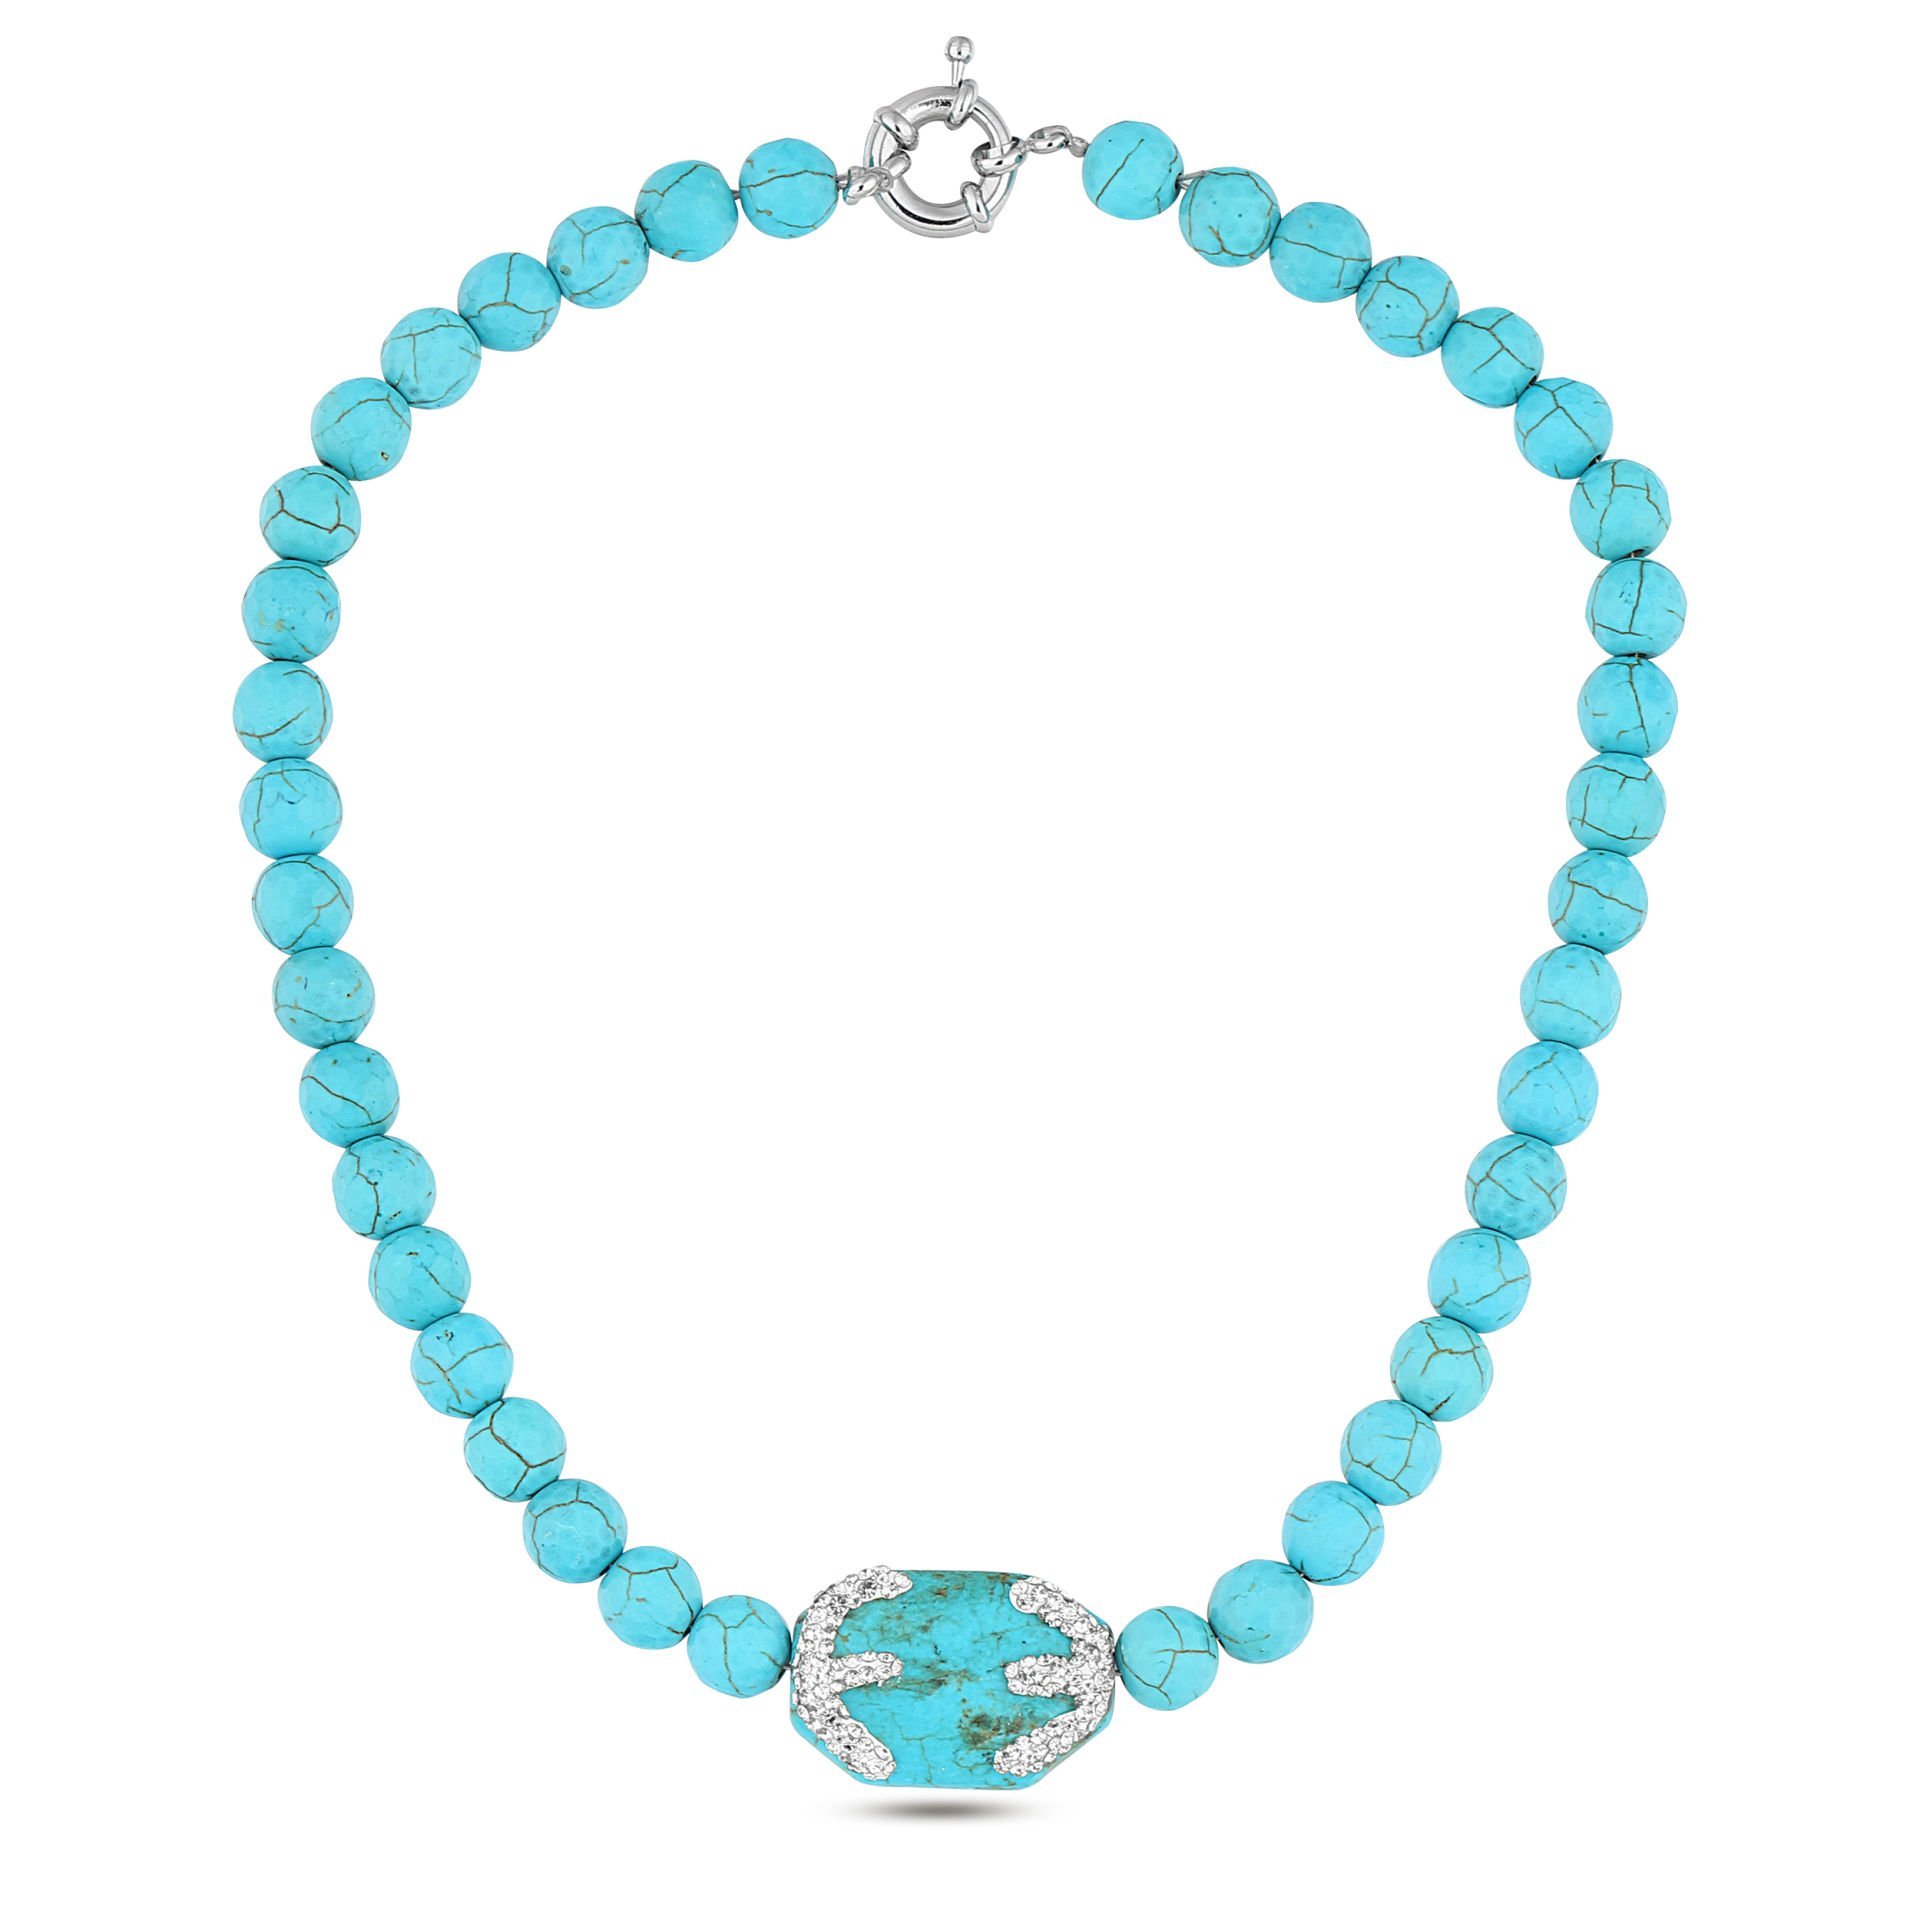 Turquoise Summer Necklace